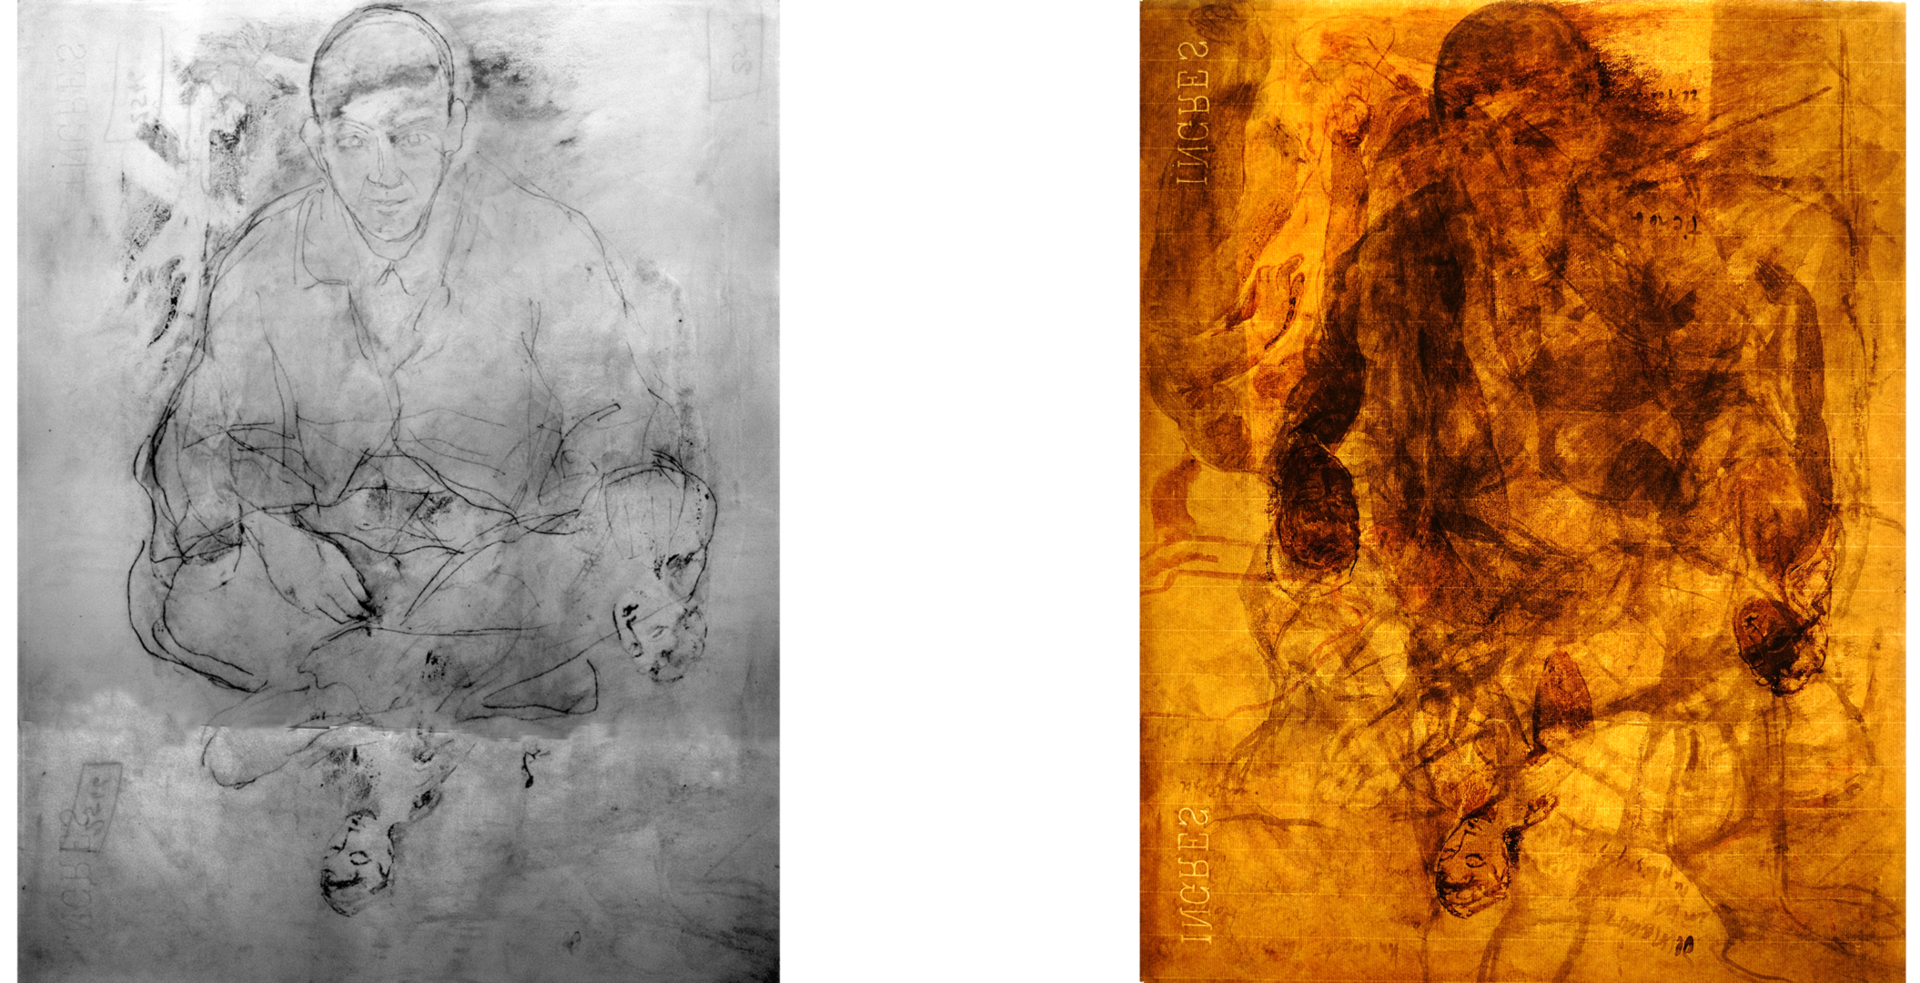 A pencil sketch of a seated figure upside down seen in black and white with IRR (left) and in a bright orange with transmitted light (right)